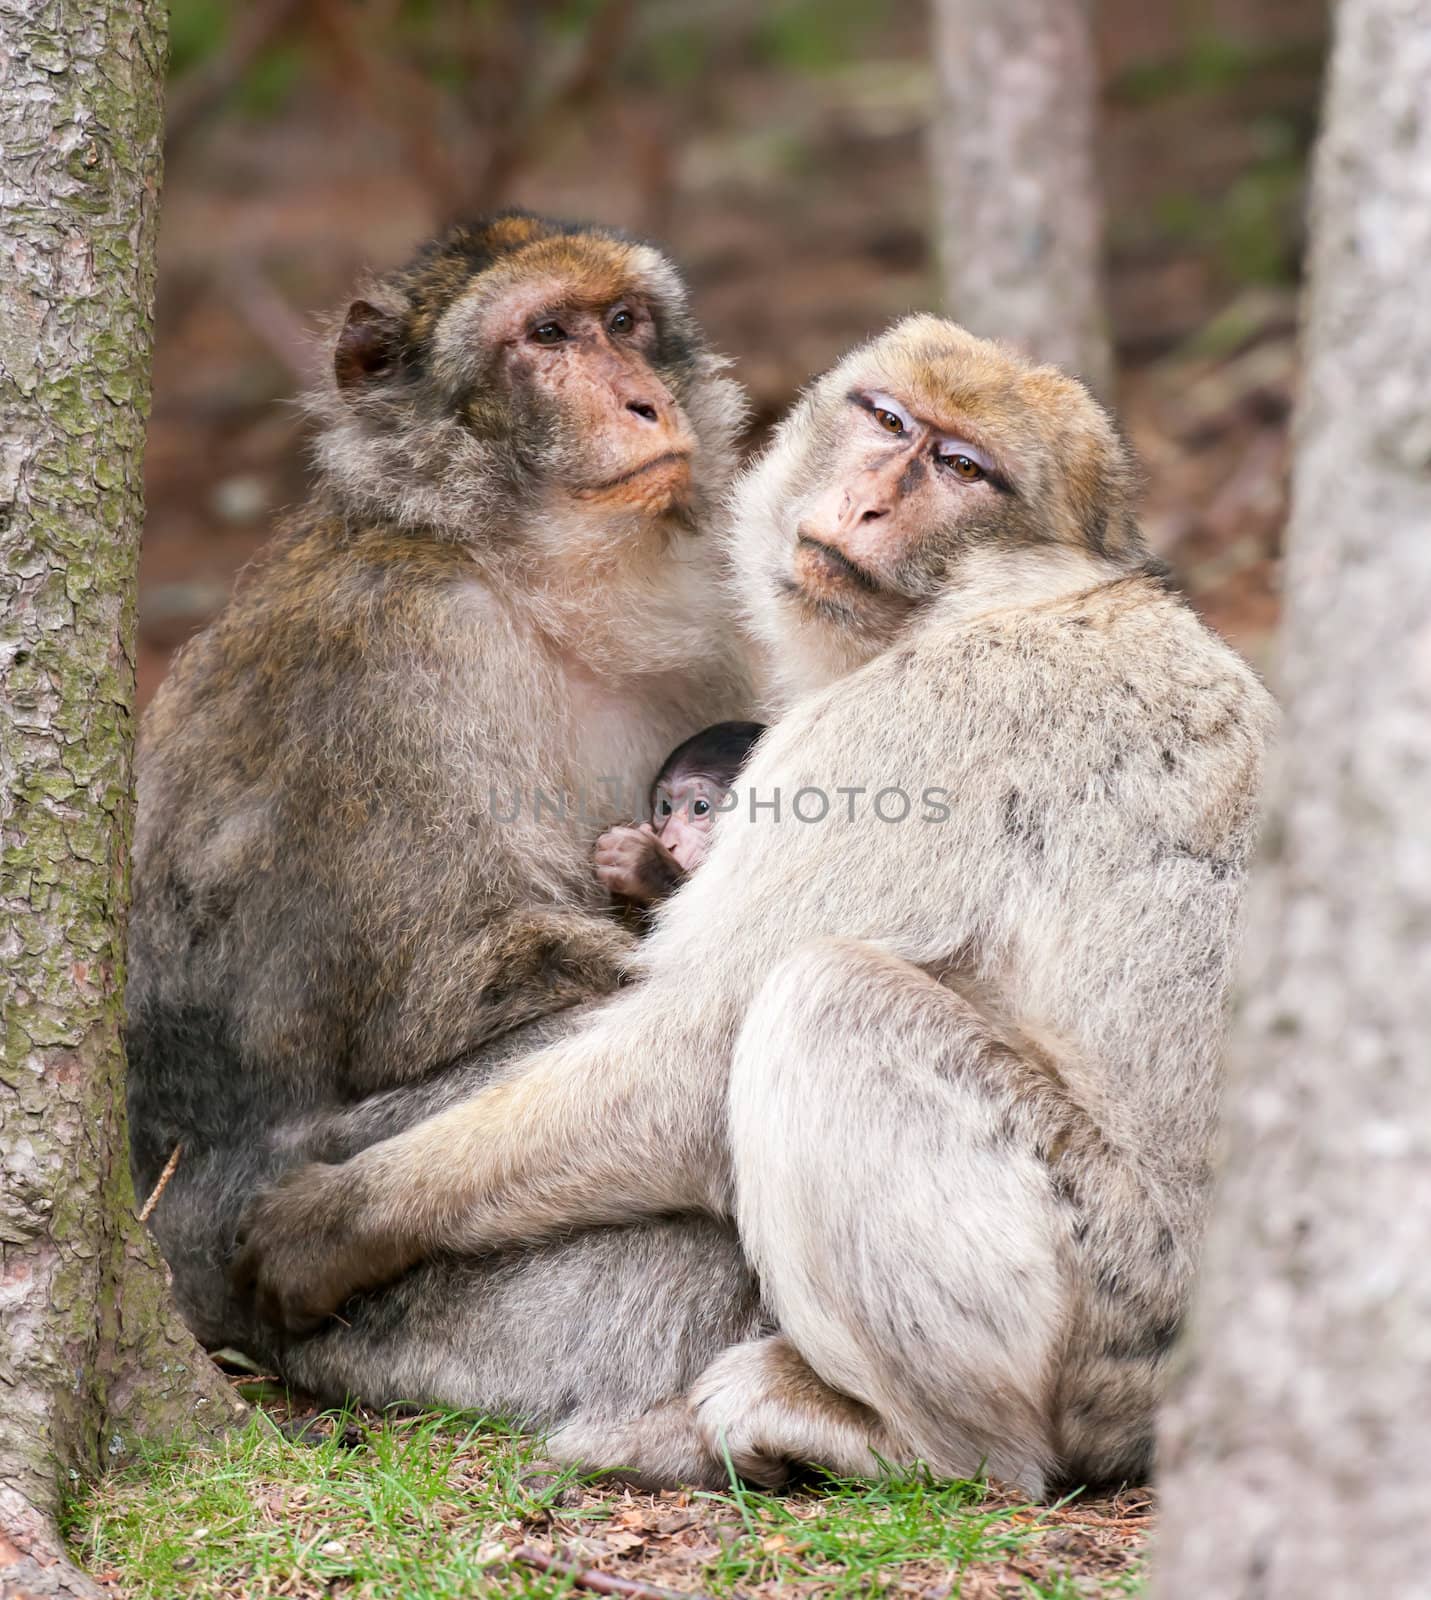 Monkey Parents keep their baby warm outside